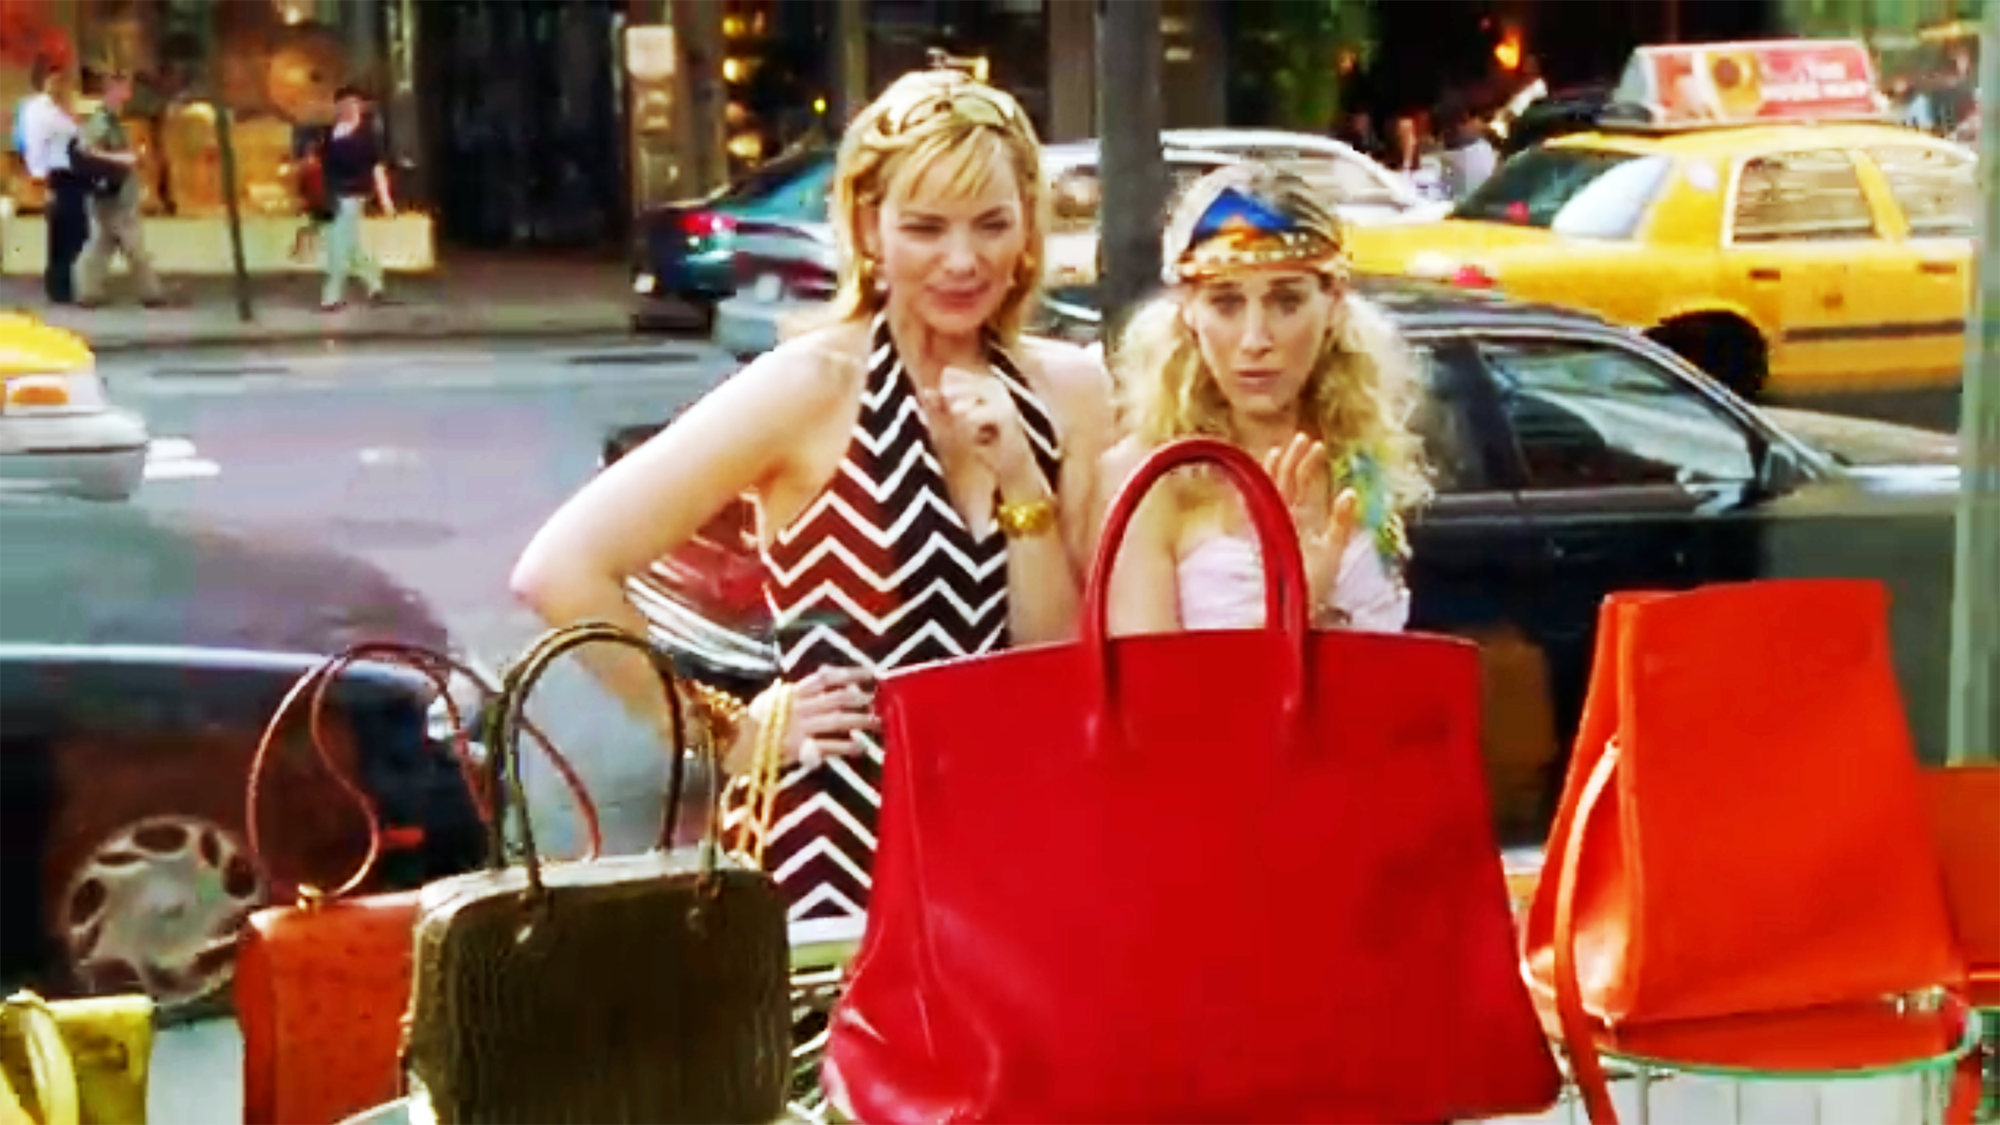 Sex and the City's Sam Jones and the Hermes Birkin Bag episode is a great example of how luxury brands marketing can work.